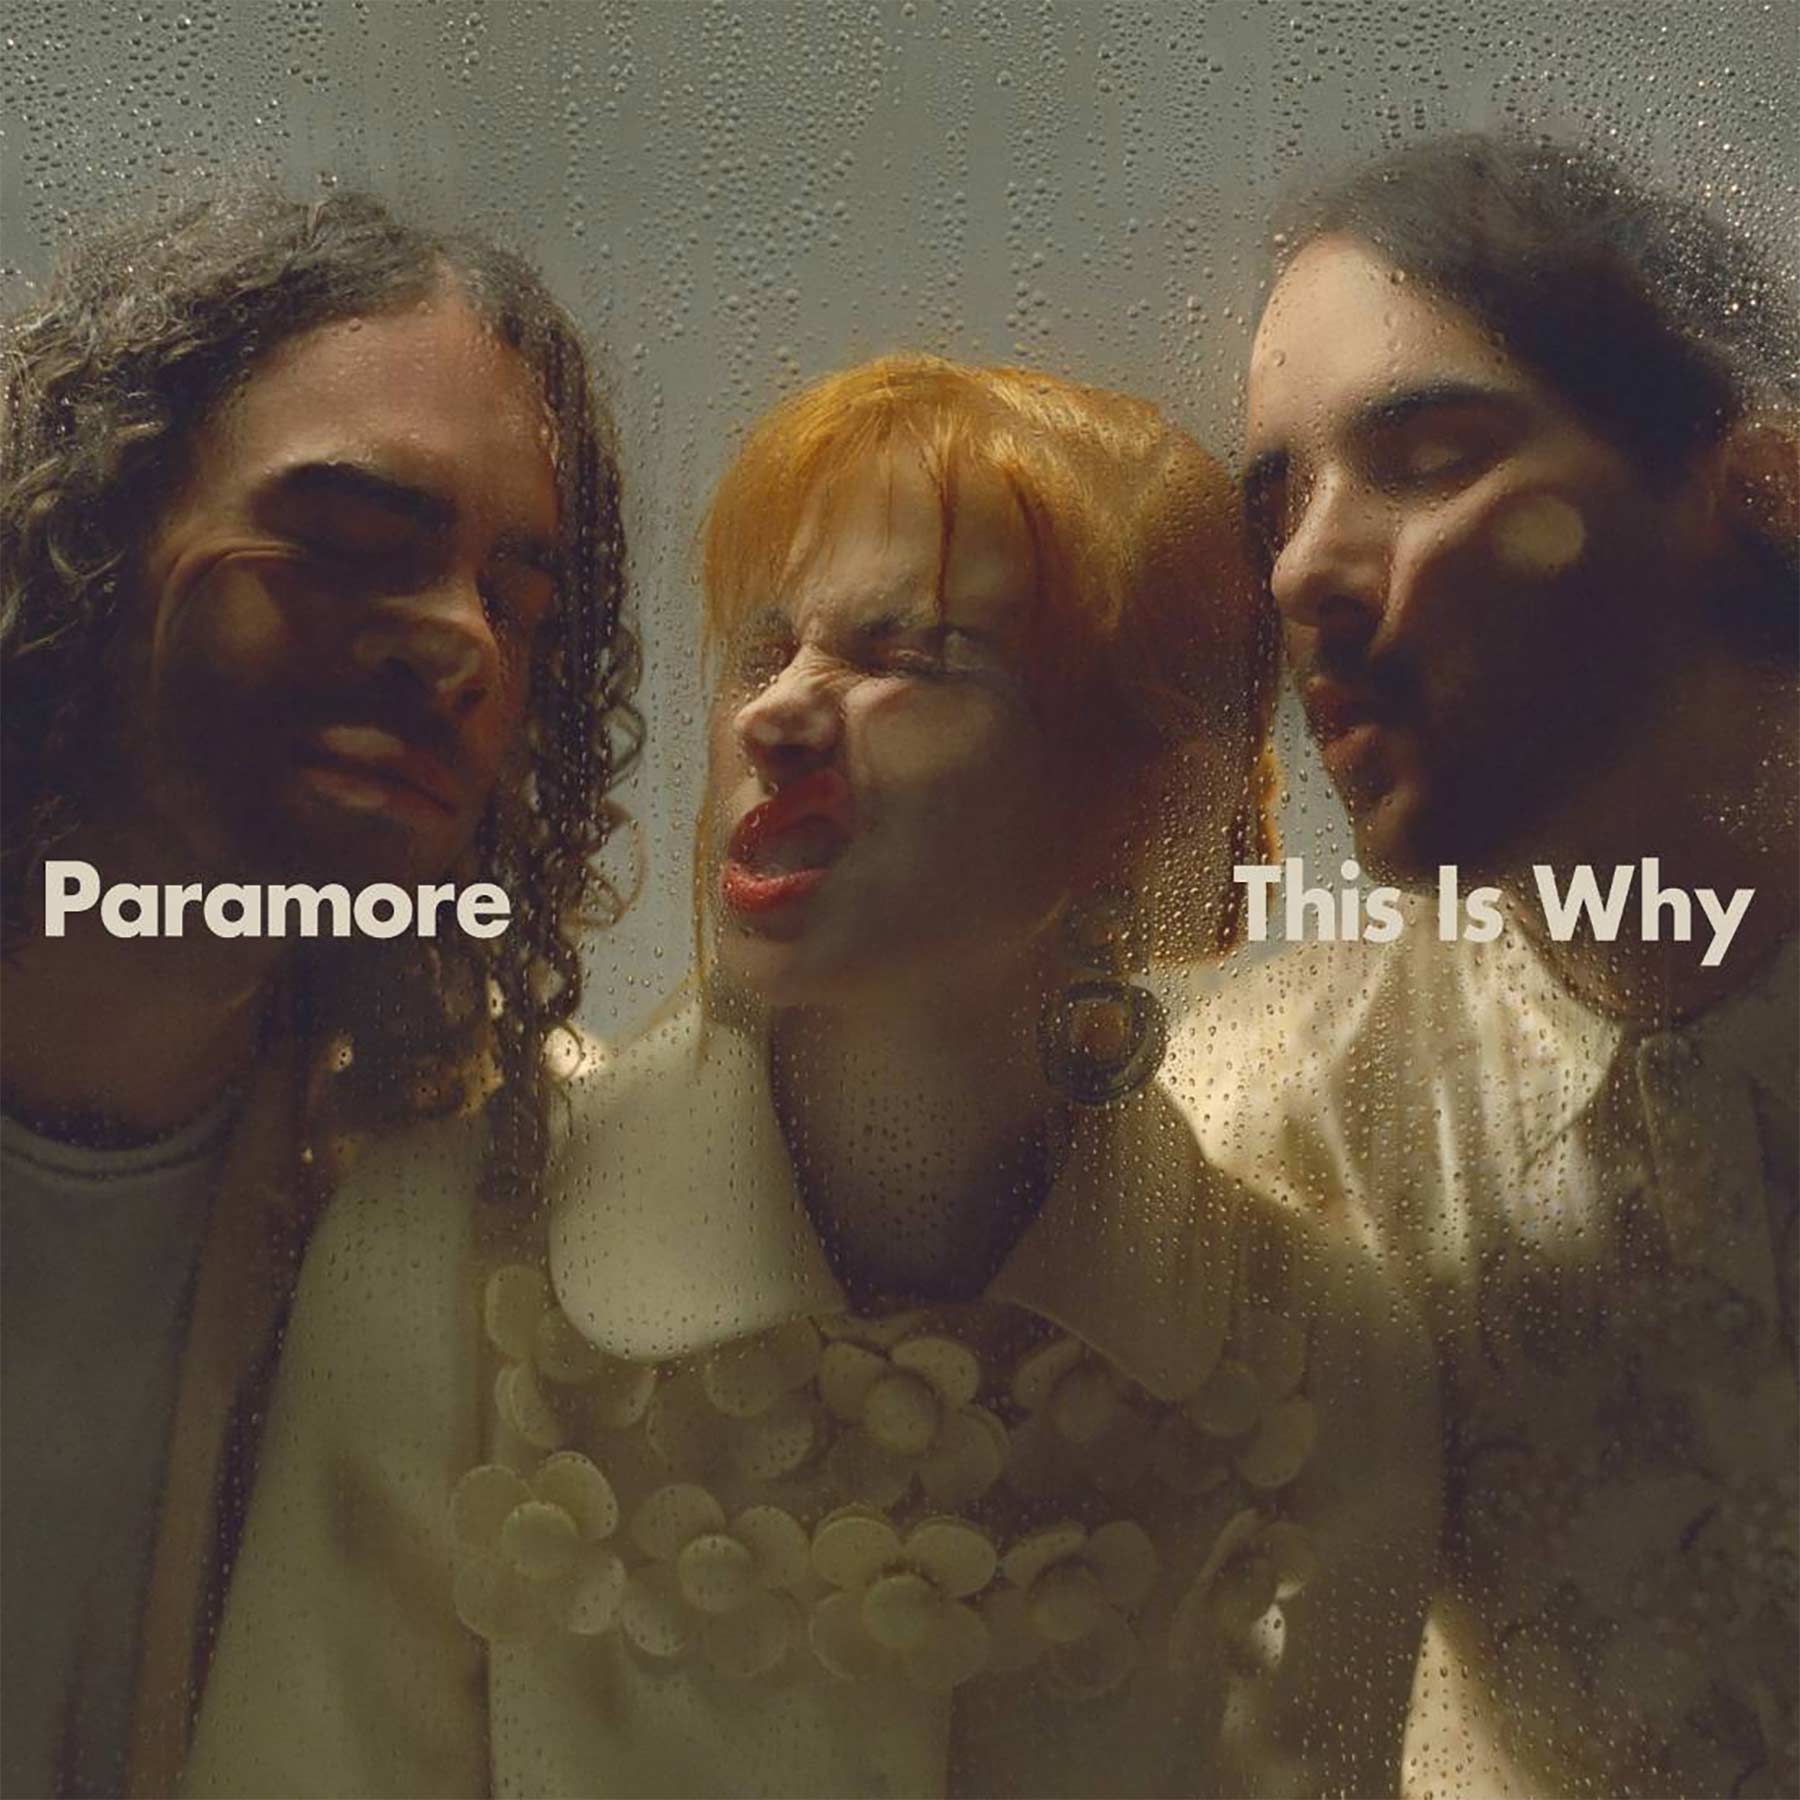 Musikvideo: Paramore - "This Is Why" paramore-this-is-why-albumcover 